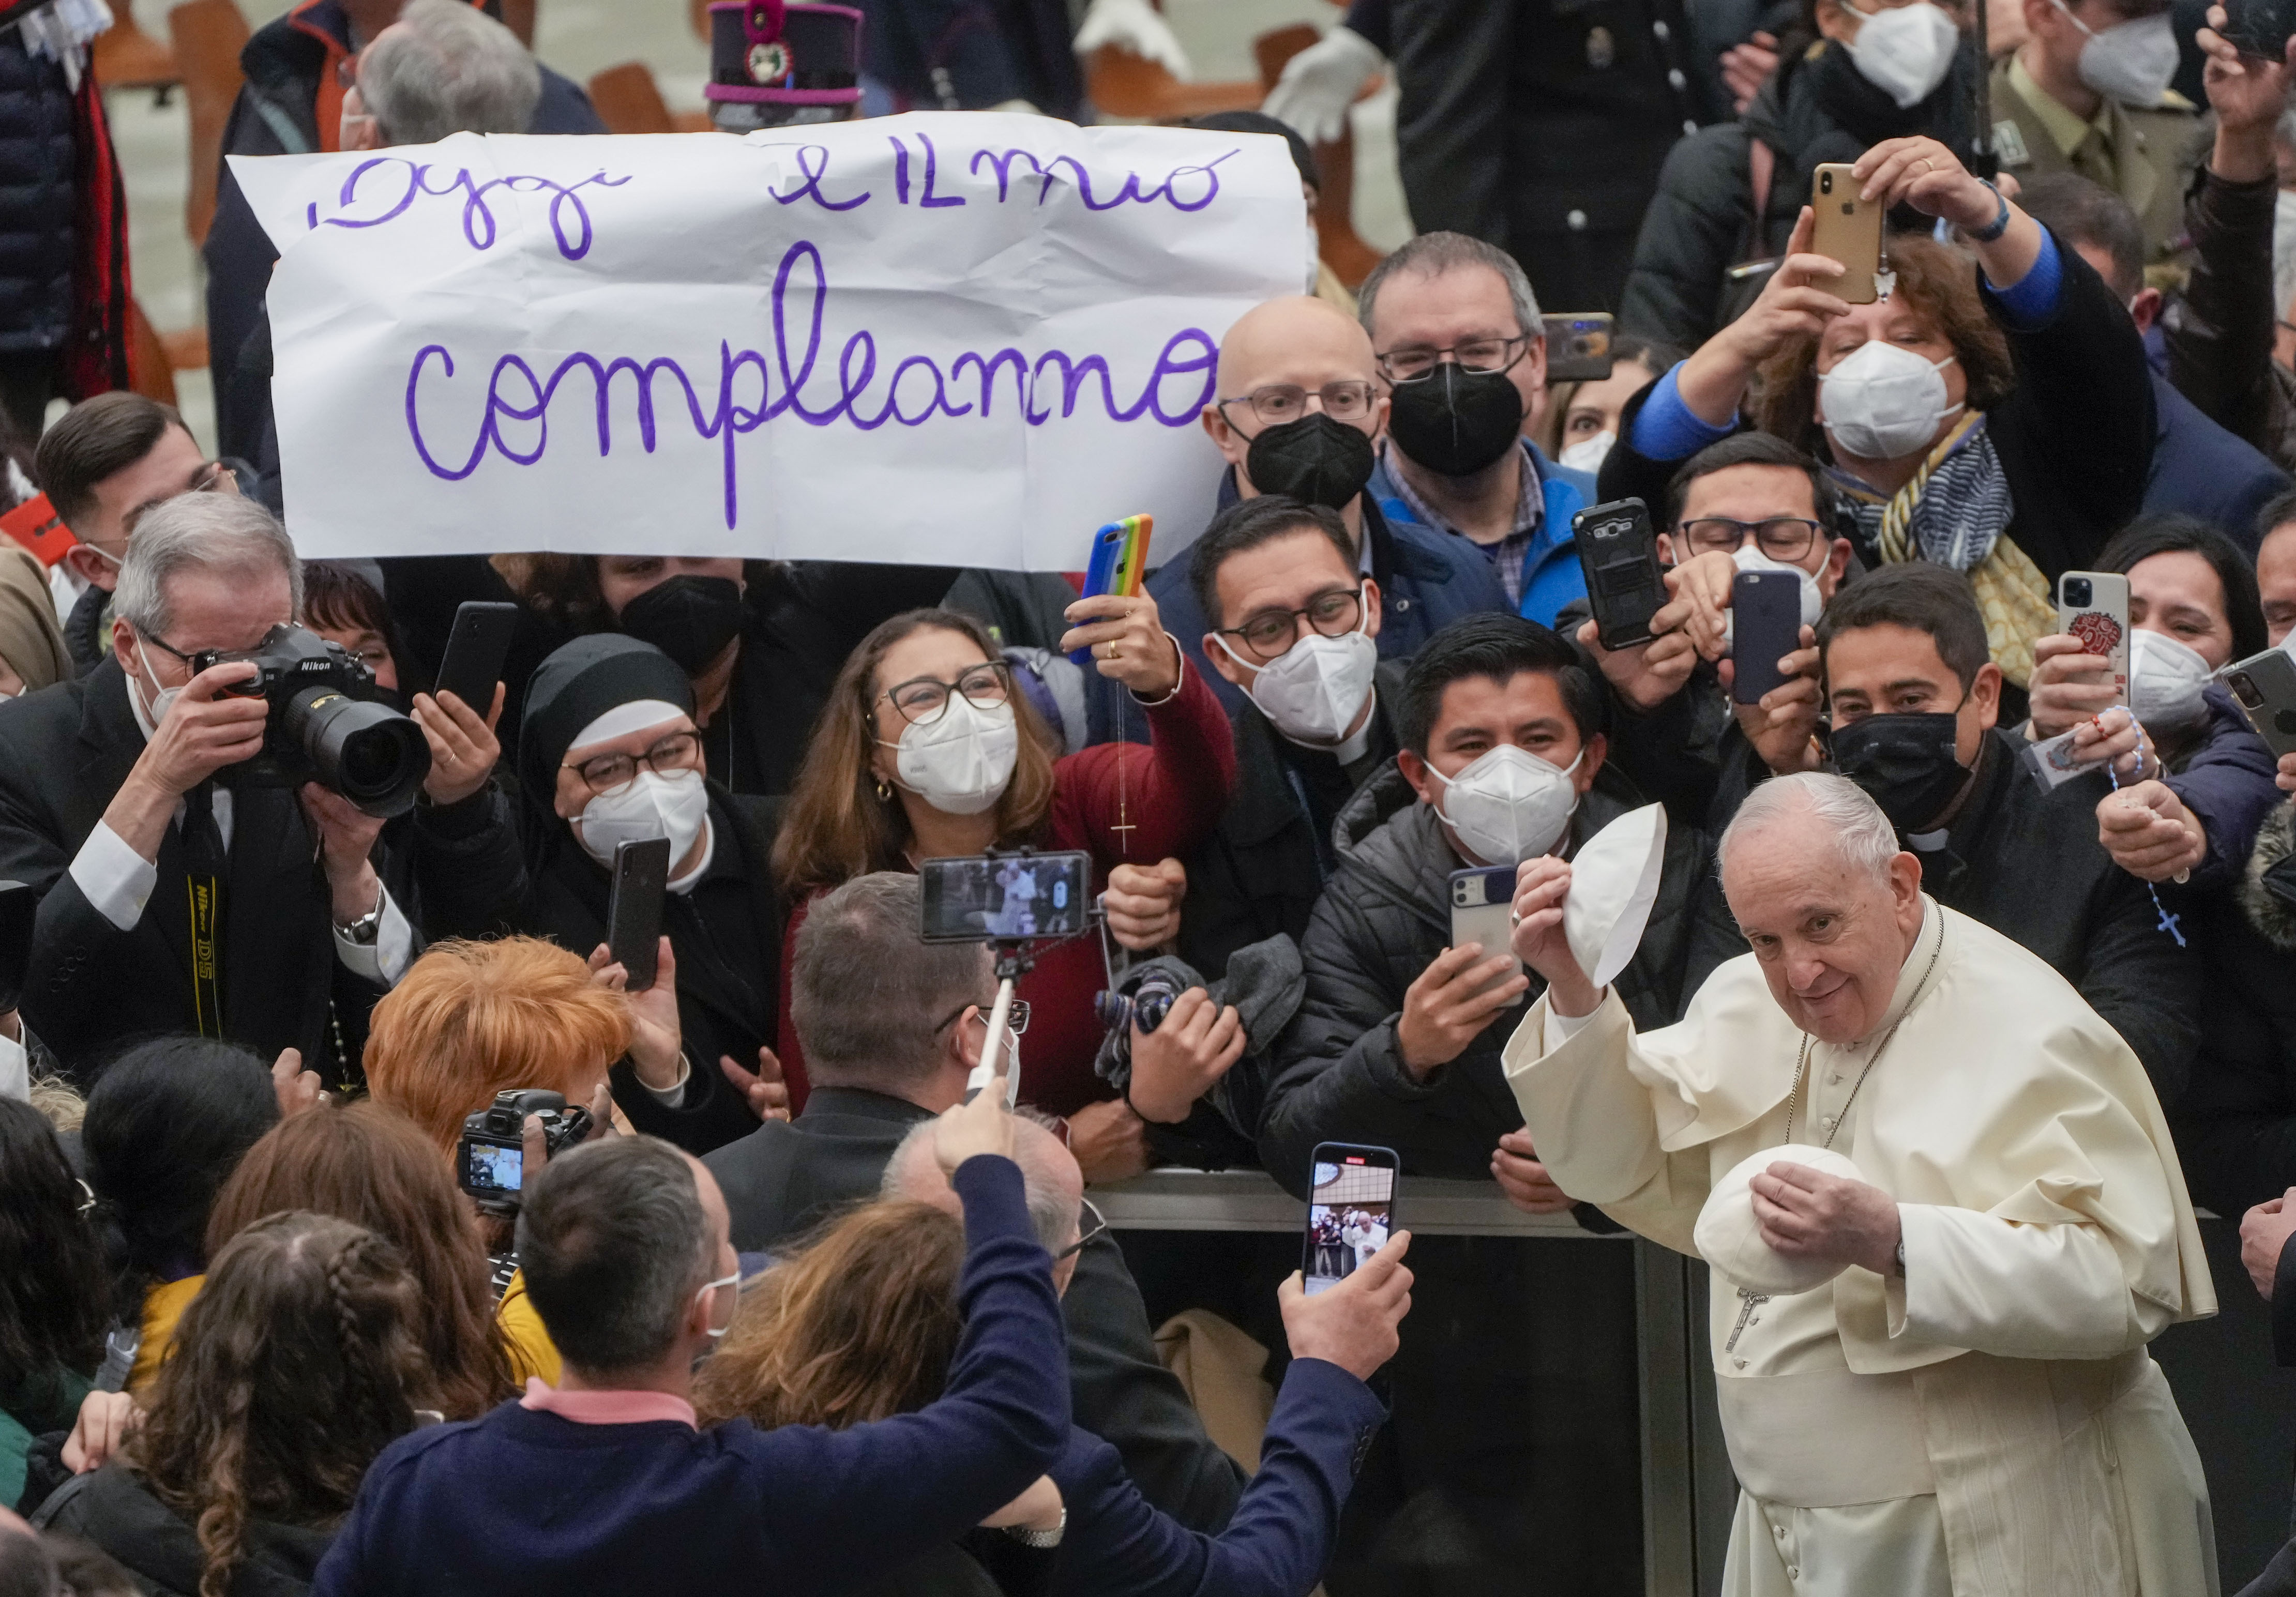 Pope Francis puts on a skull cap he was just presented with as he walks by a placard in Italian reading : "Today is my birthday", at the end of his weekly general audience in the Paul VI Hall at the Vatican, Wednesday, Feb. 02, 2022. (AP Photo/Gregorio Bo